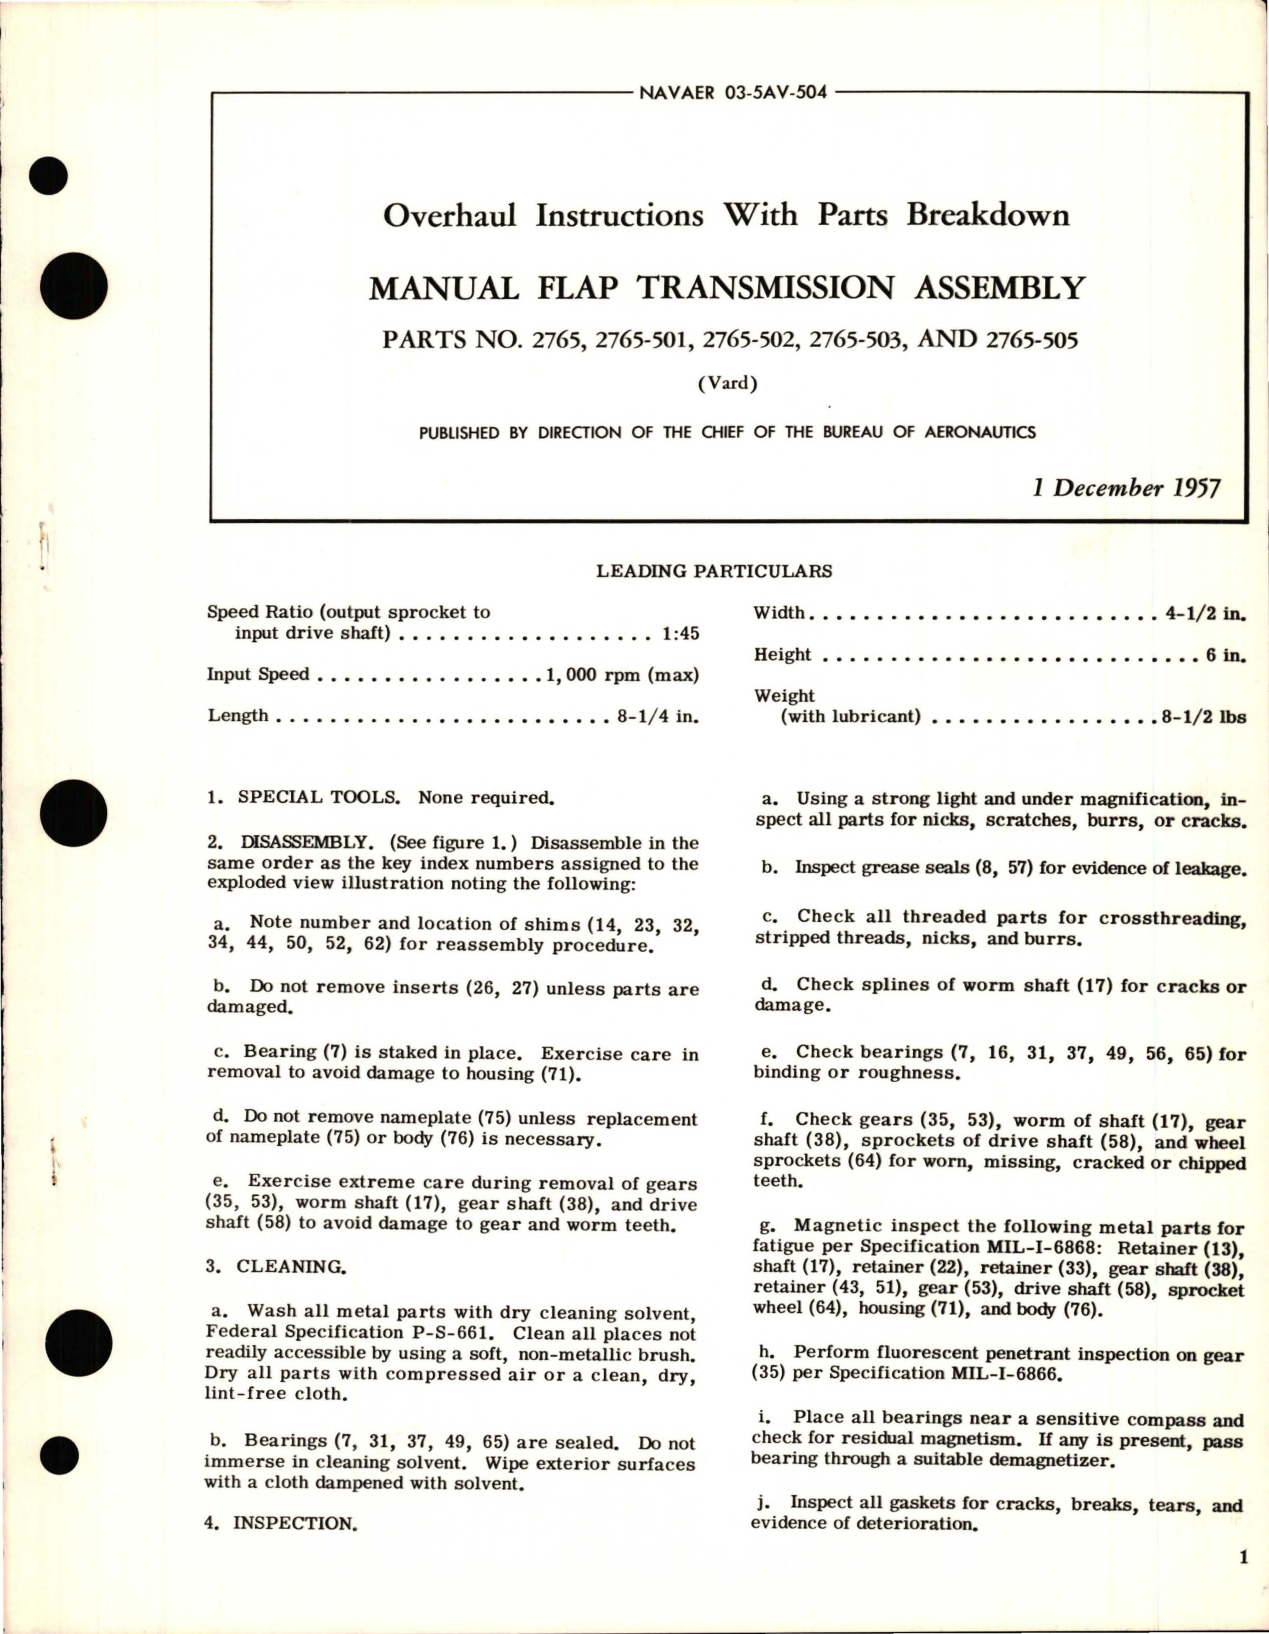 Sample page 1 from AirCorps Library document: Overhaul Instructions with Parts Breakdown for Manual Flap Transmission Assembly